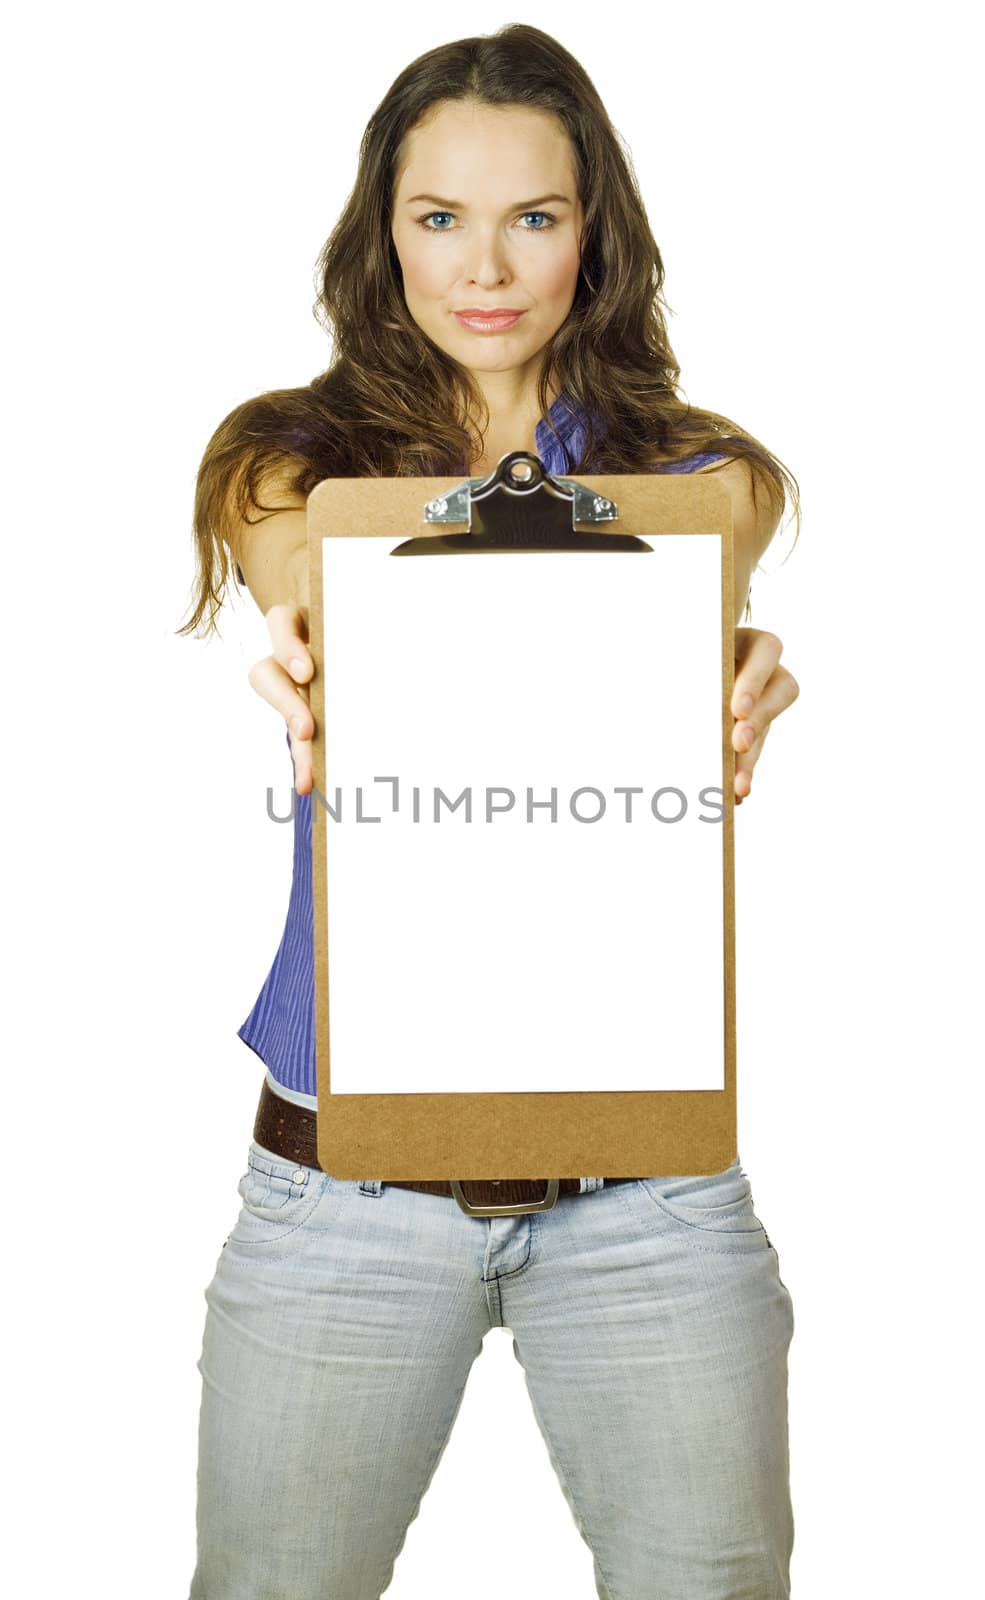 An attractive woman with attitude holding a clipboard with blank piece of paper and looking into  camera